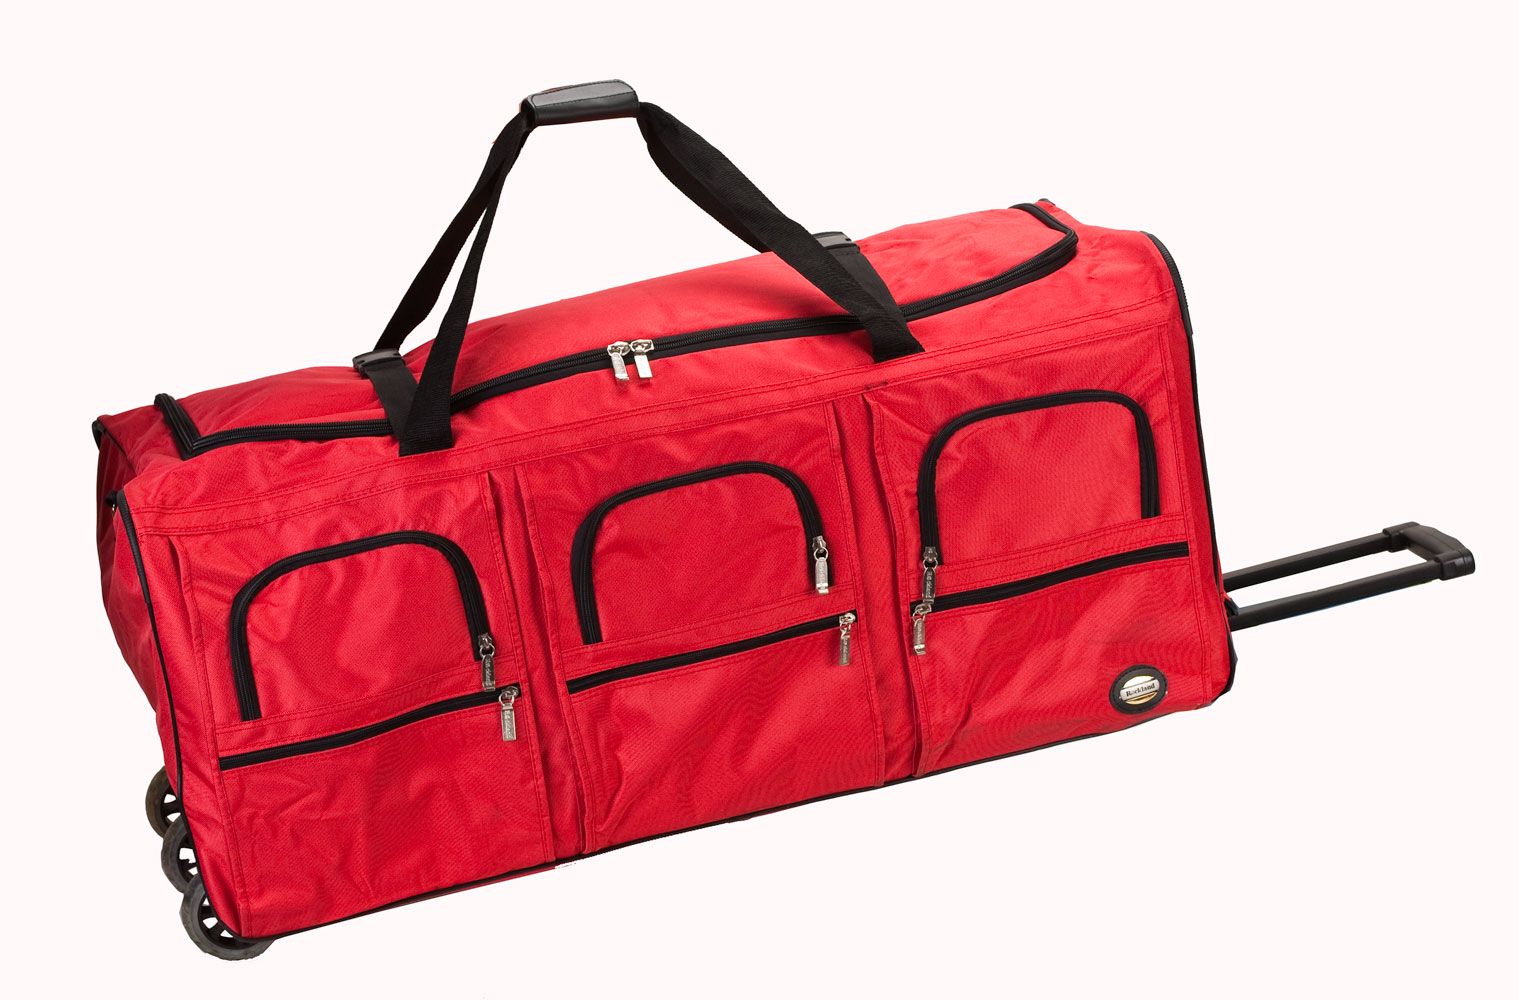 Rockland Fox Luggage 40&quot; ROLLING DUFFLE - Home - Luggage & Travel Gear - Carry-on & Checked Luggage